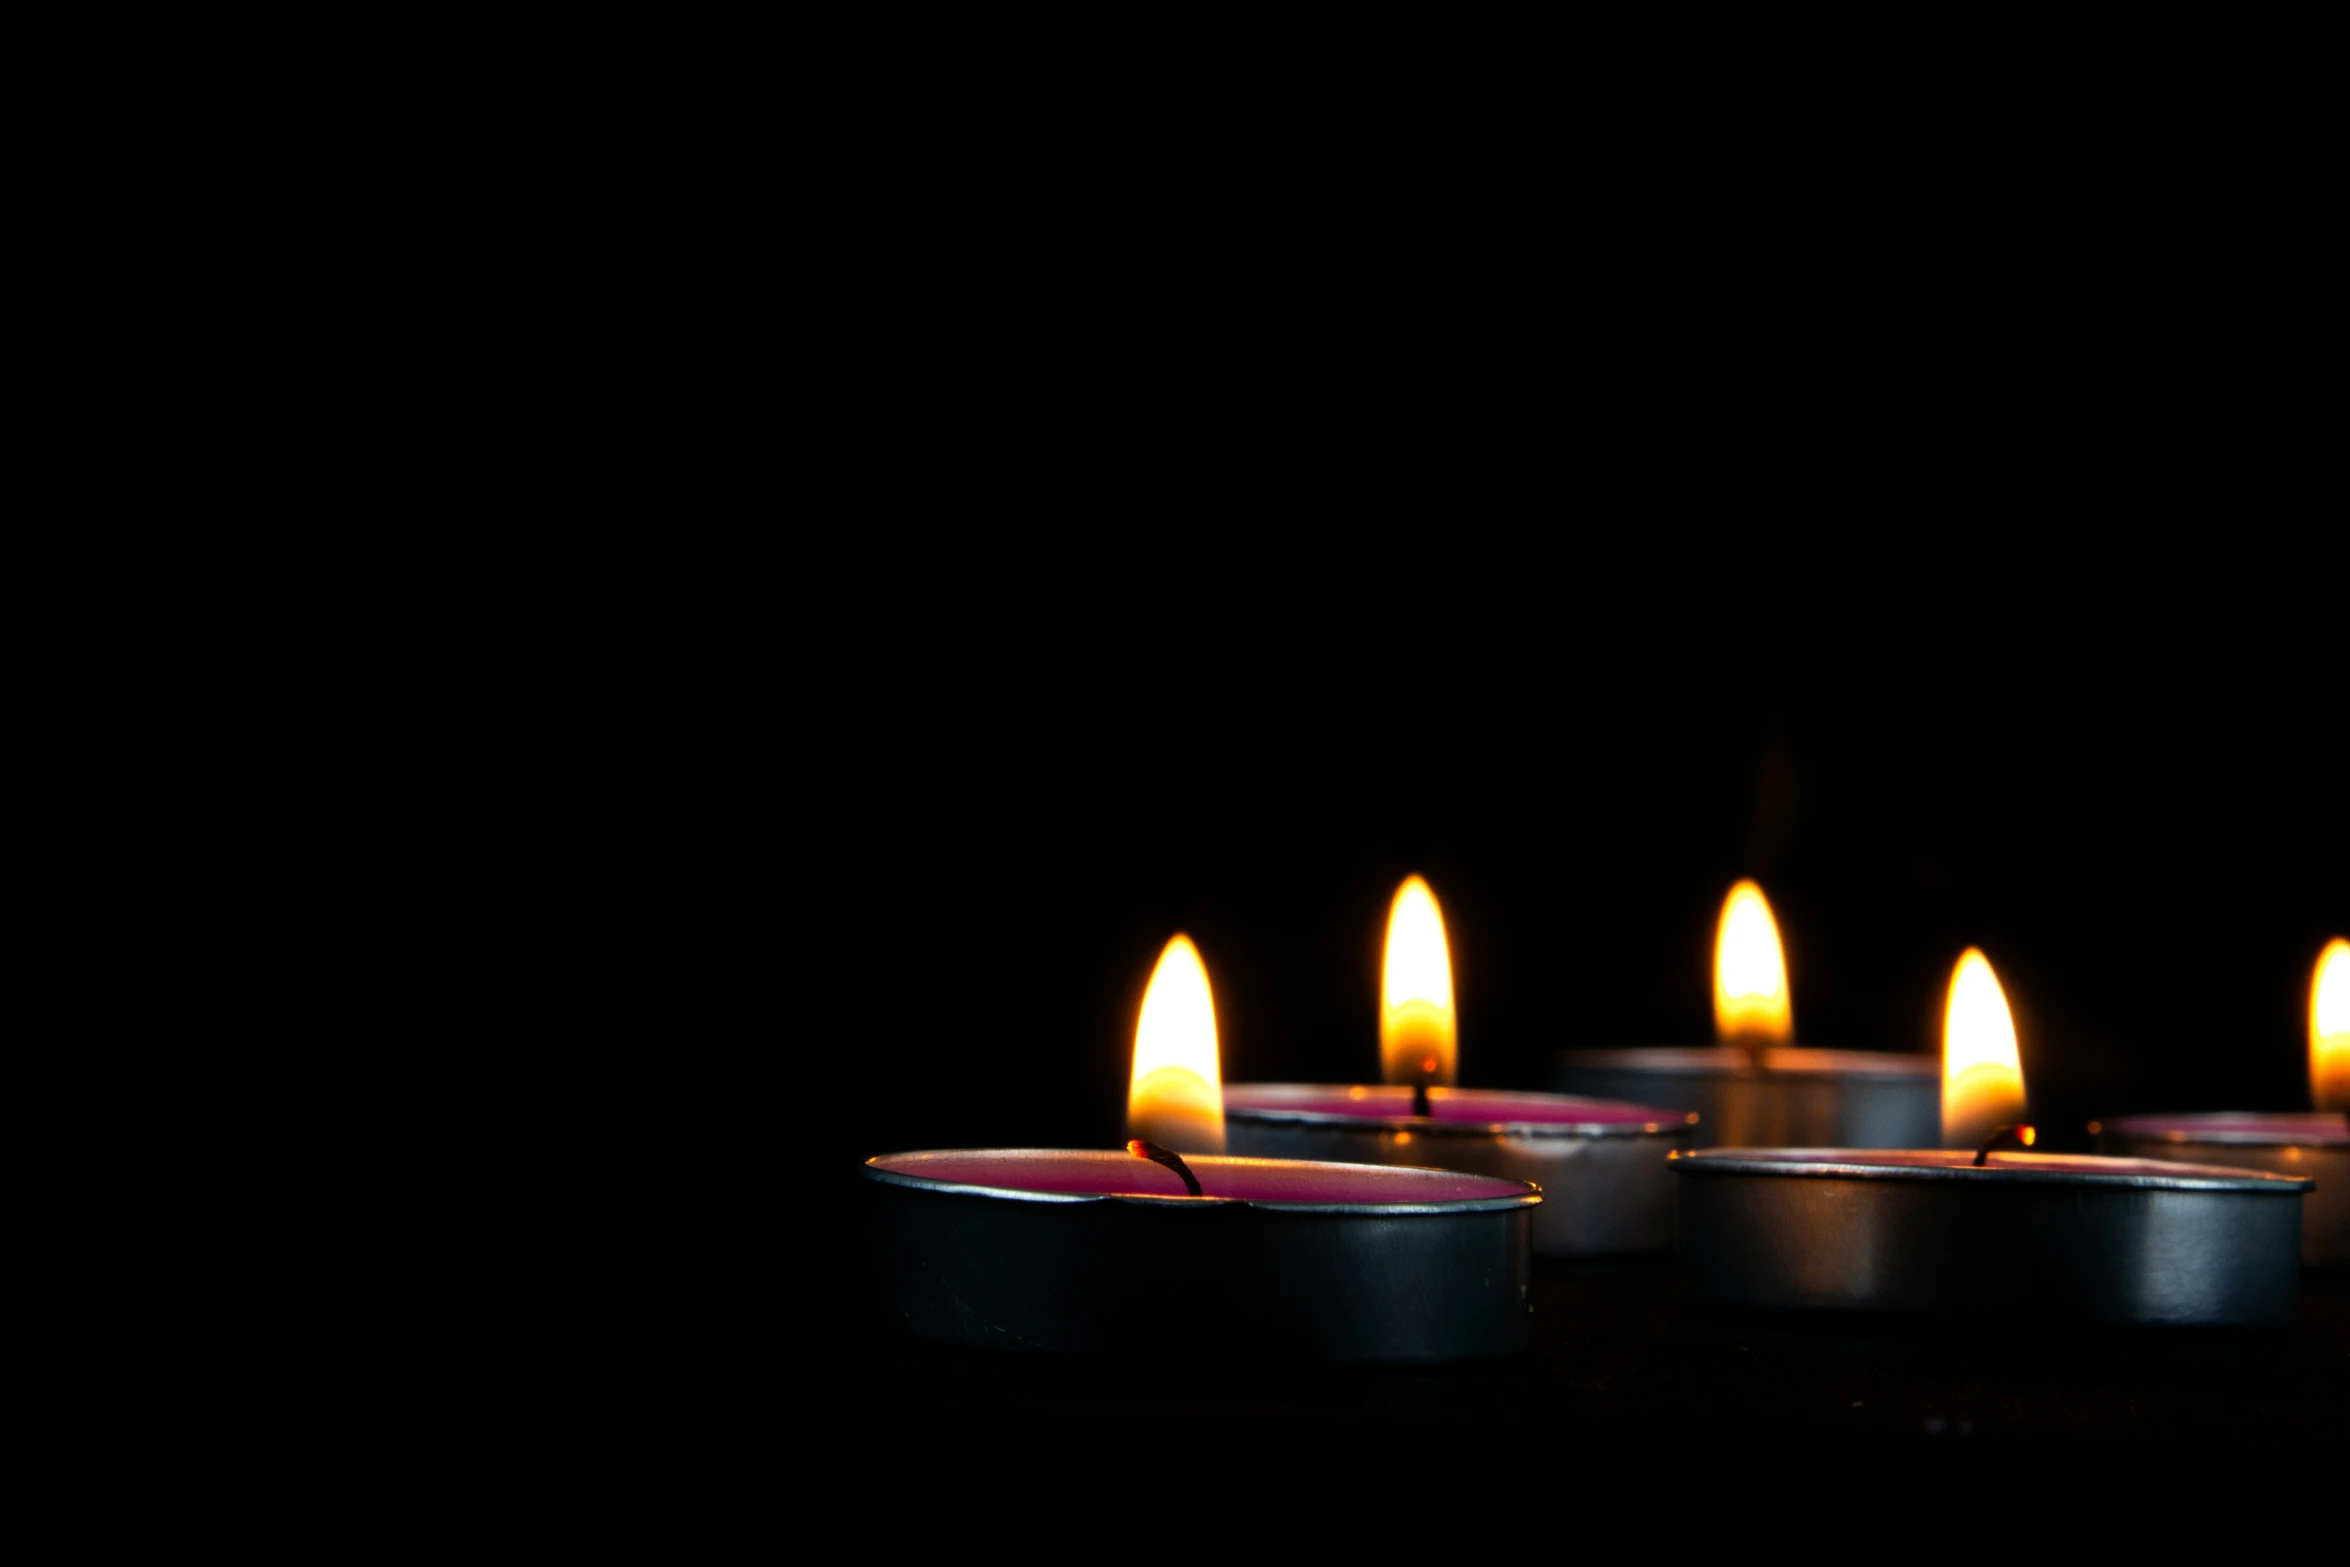 seven lit candles are shown on a dark surface